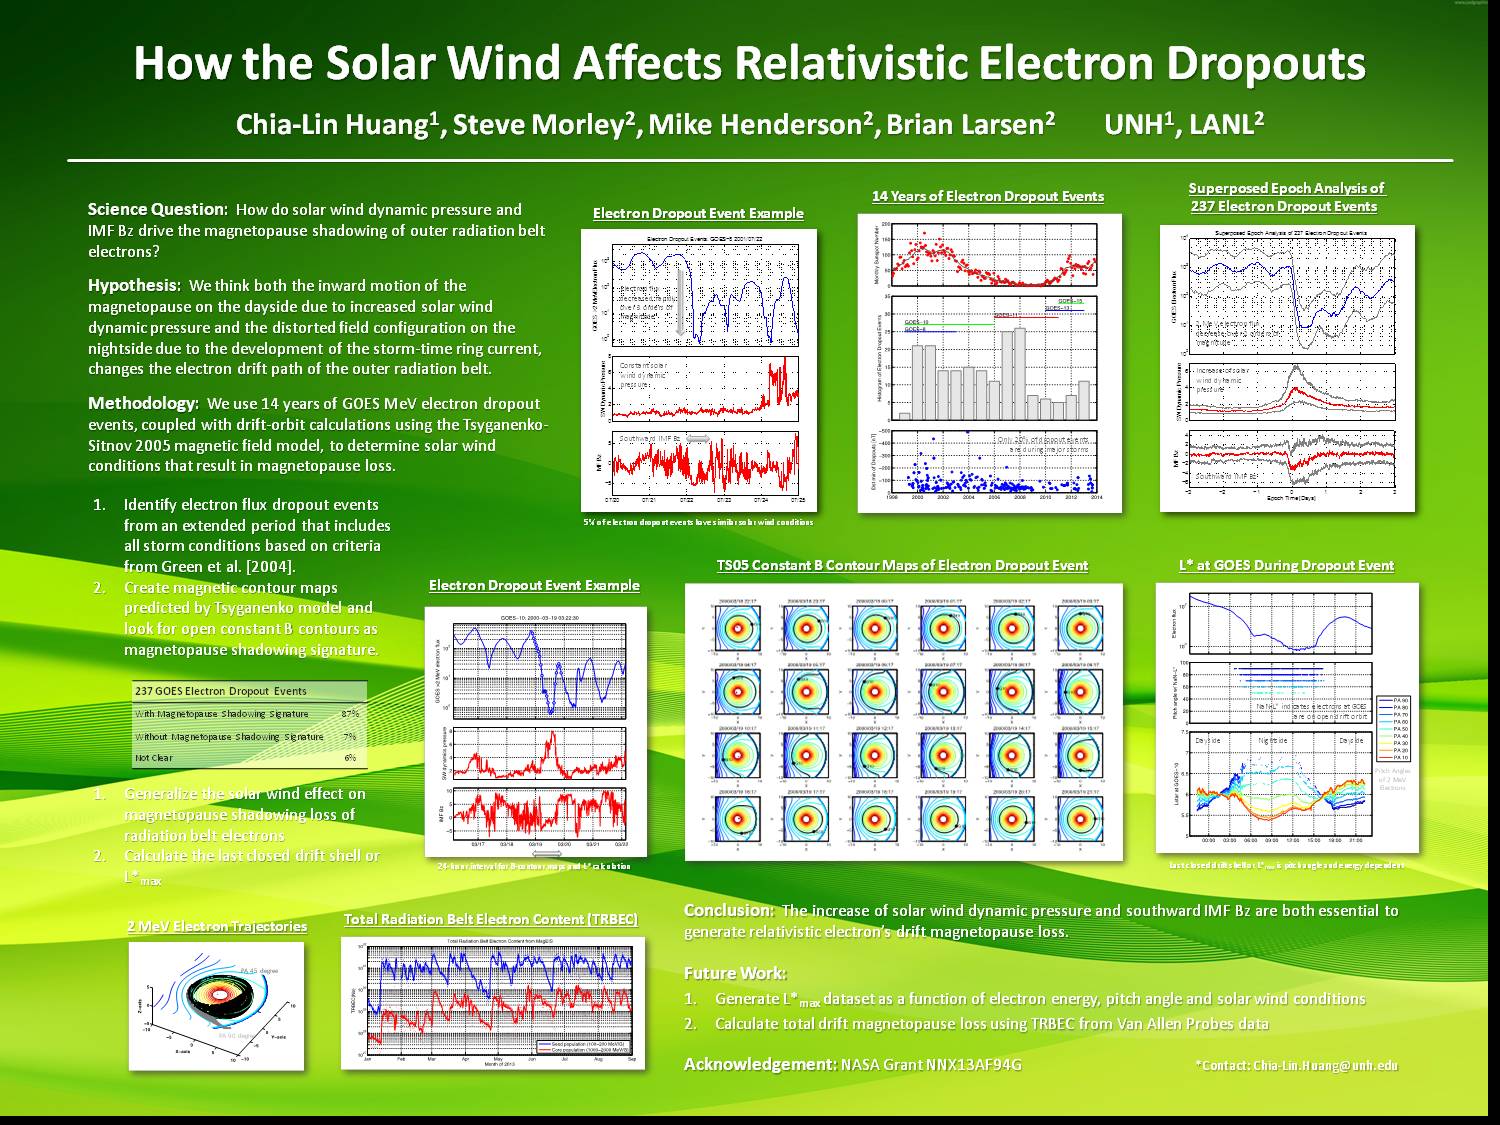 How The Solar Wind Affects Relativistic Electron Dropouts by clhuang